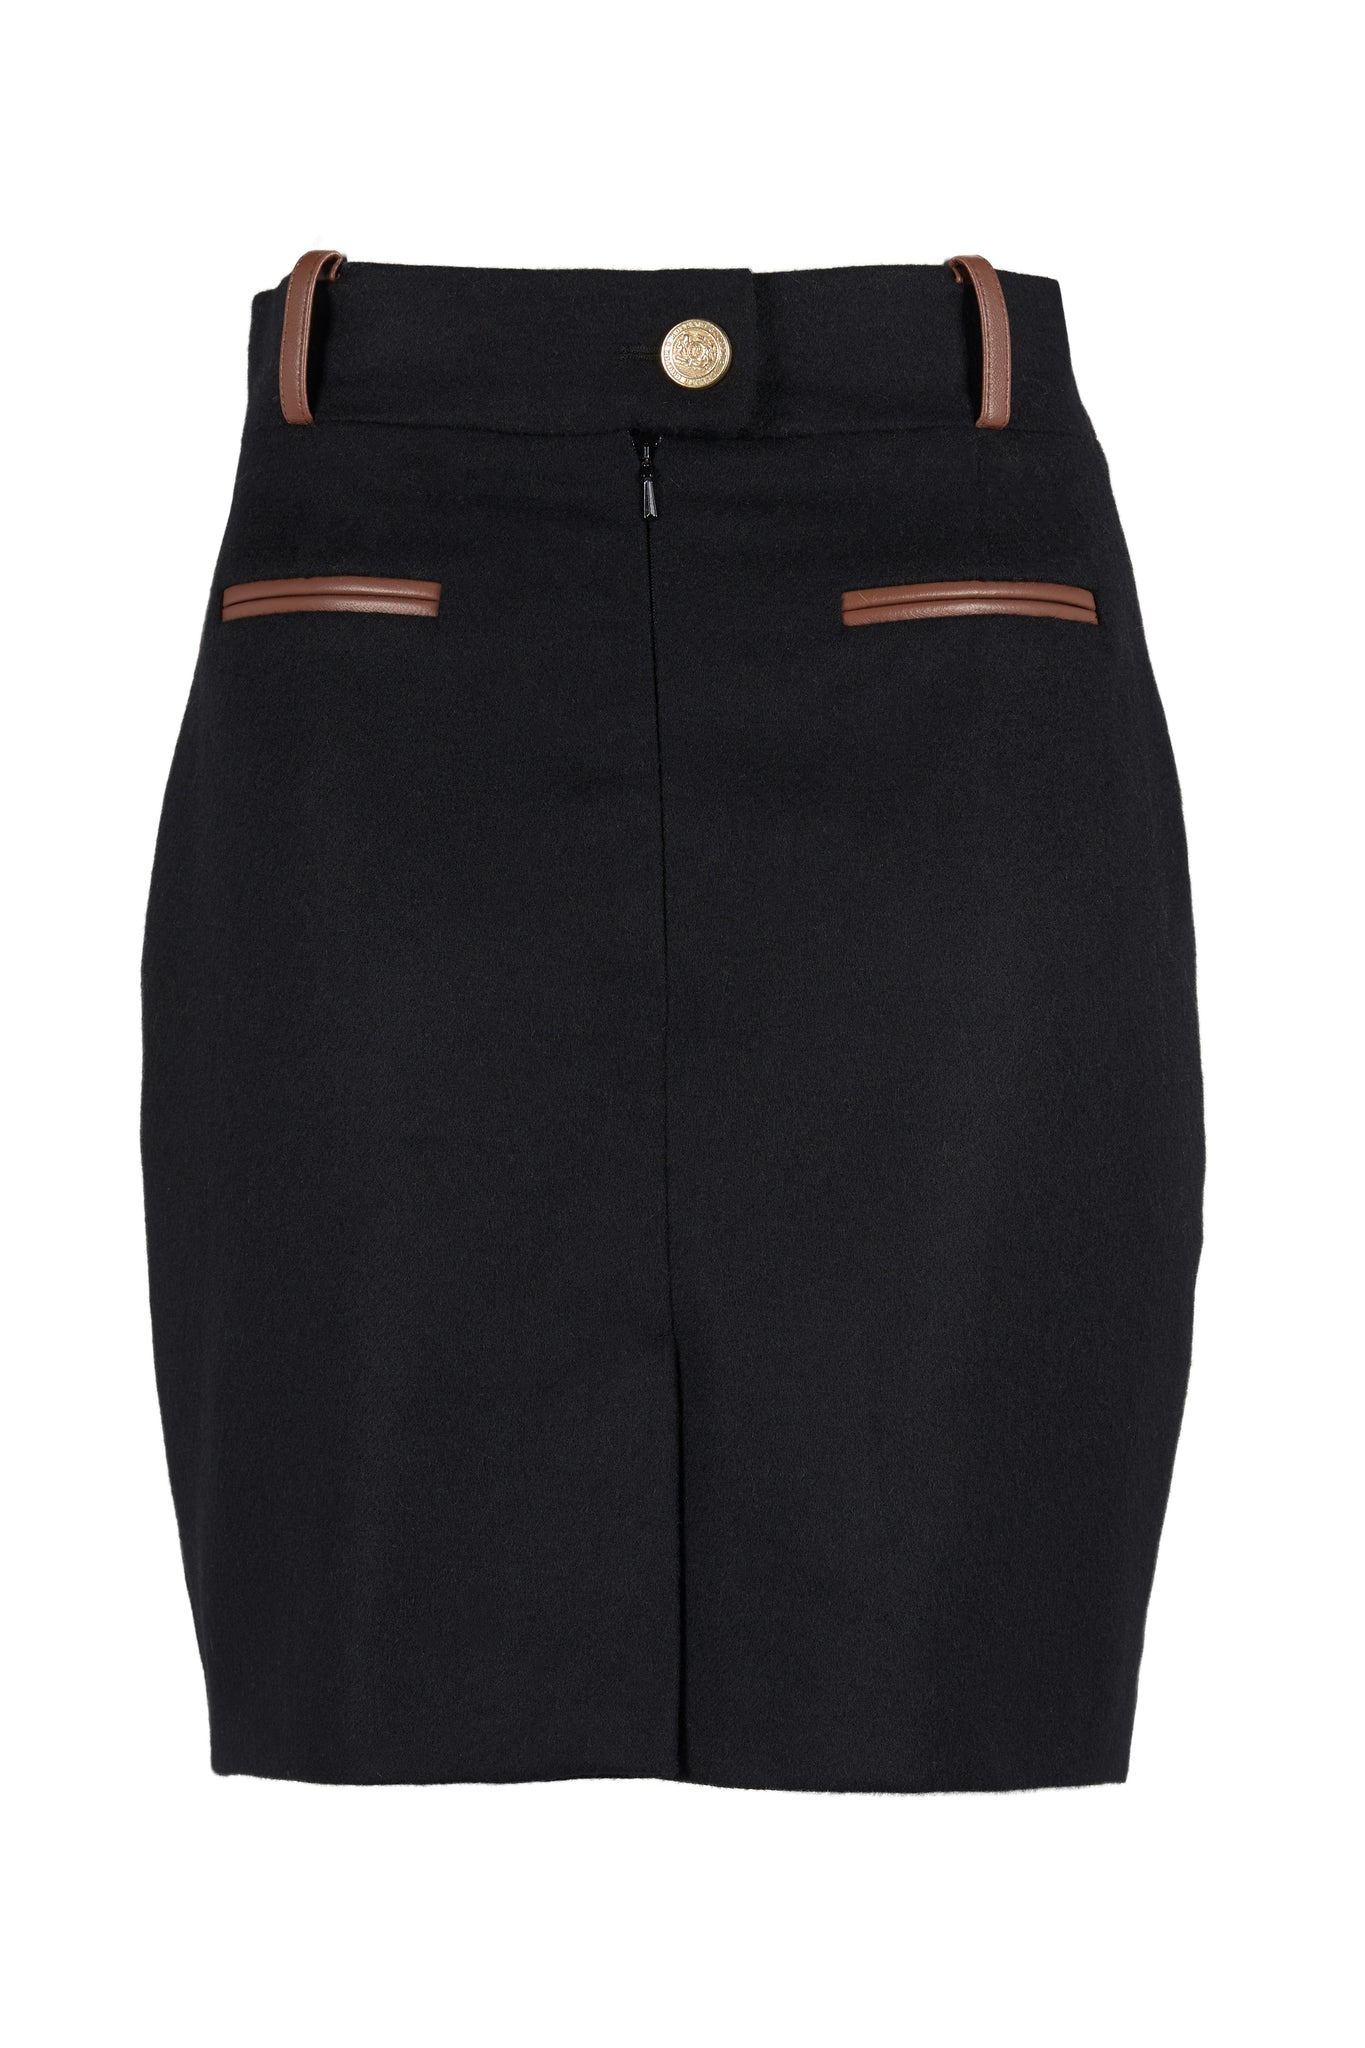 back of womens black and tan wool pencil mini skirt with concealed zip fastening on centre back and gold rivets down front